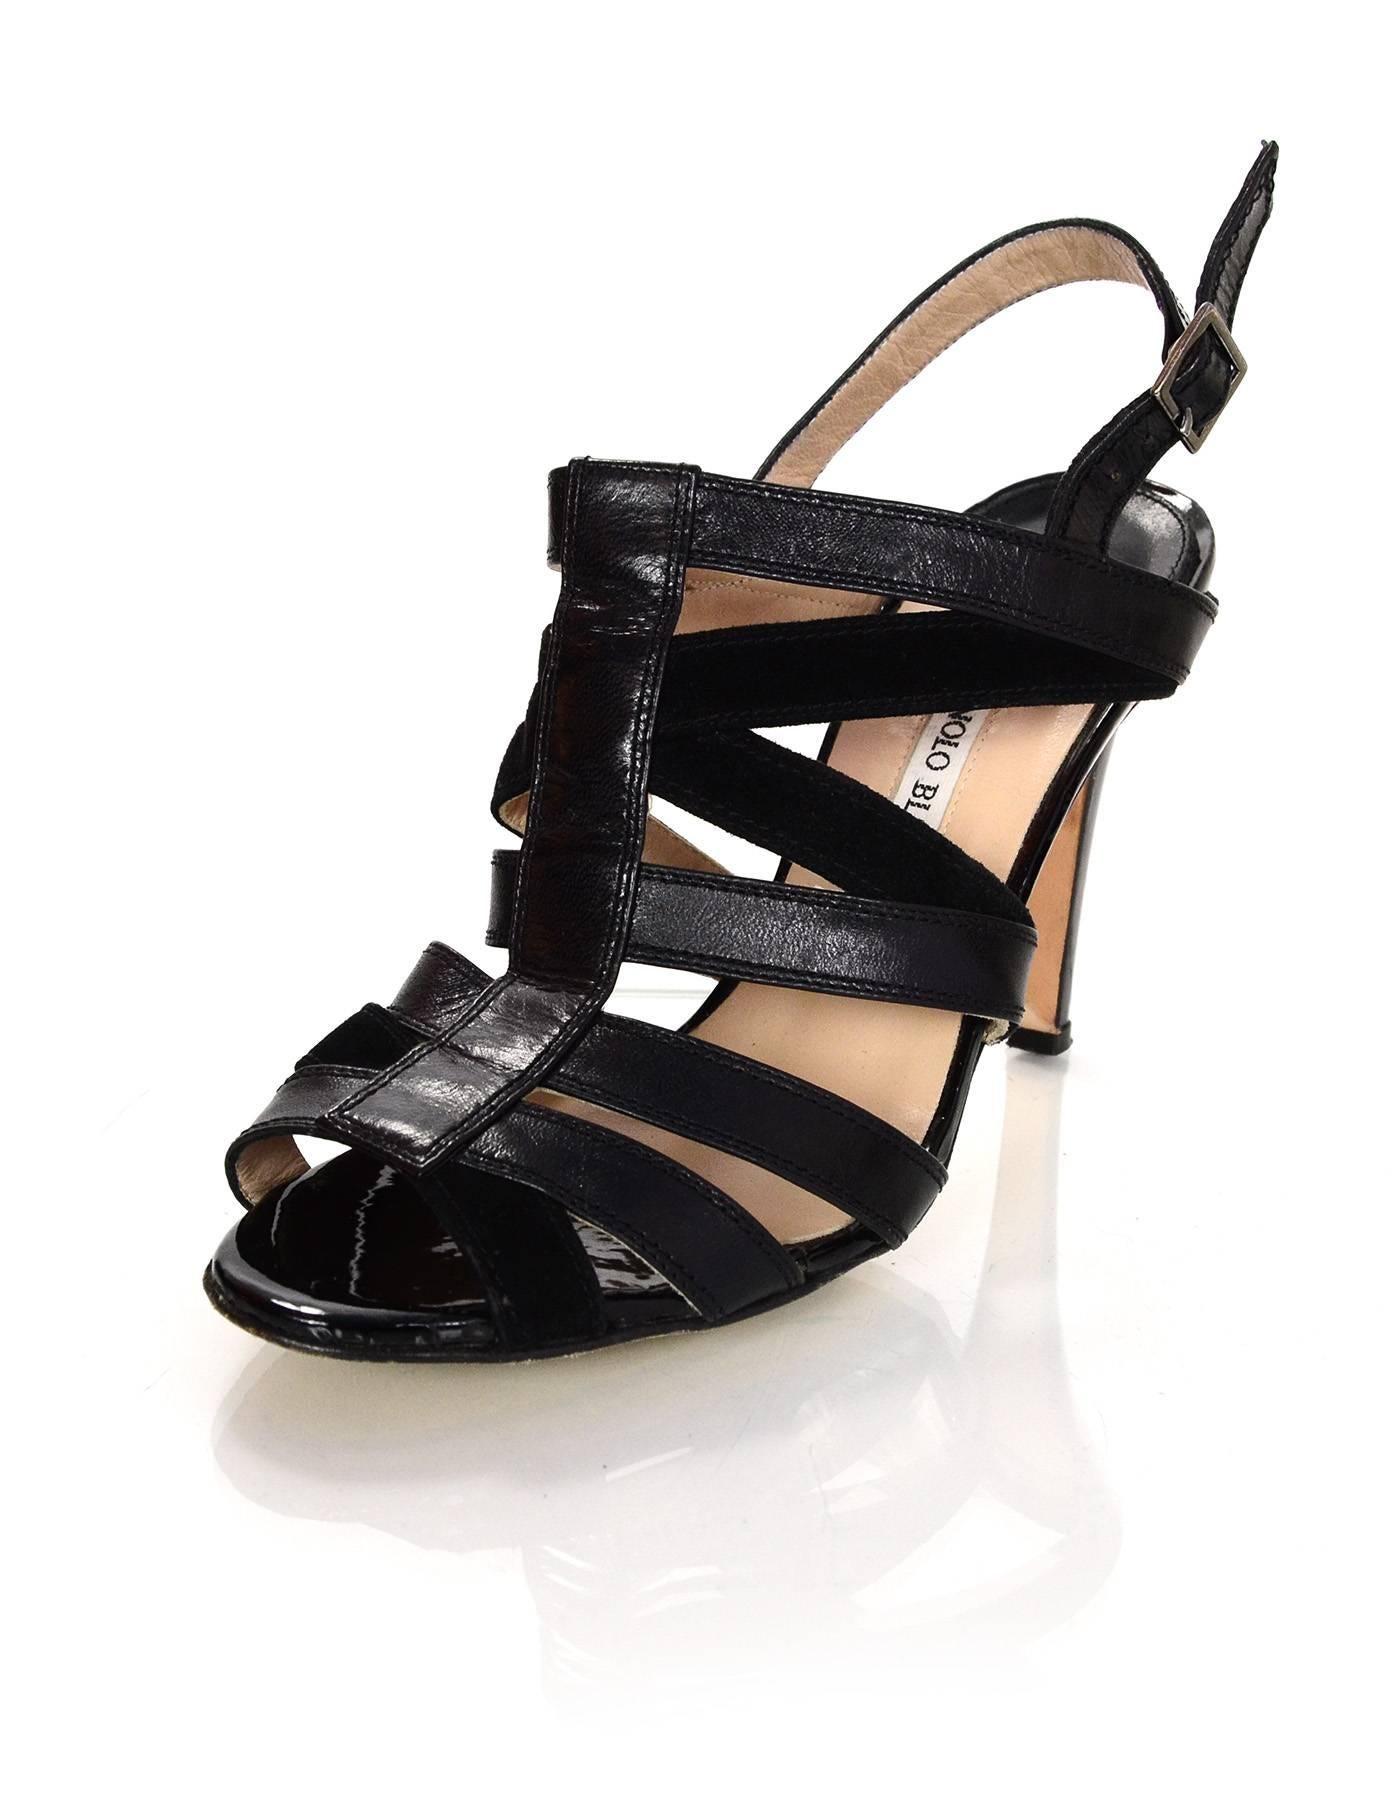 Manolo Blahnik Black Leather & Suede Strappy Sandals 
Features patent leather wrapped heel and insole toe cushion

Color: Black
Materials: Leather, patent leather and suede
Closure/Opening: Ankle strap with buckle and notch closure
Sole Stamp: